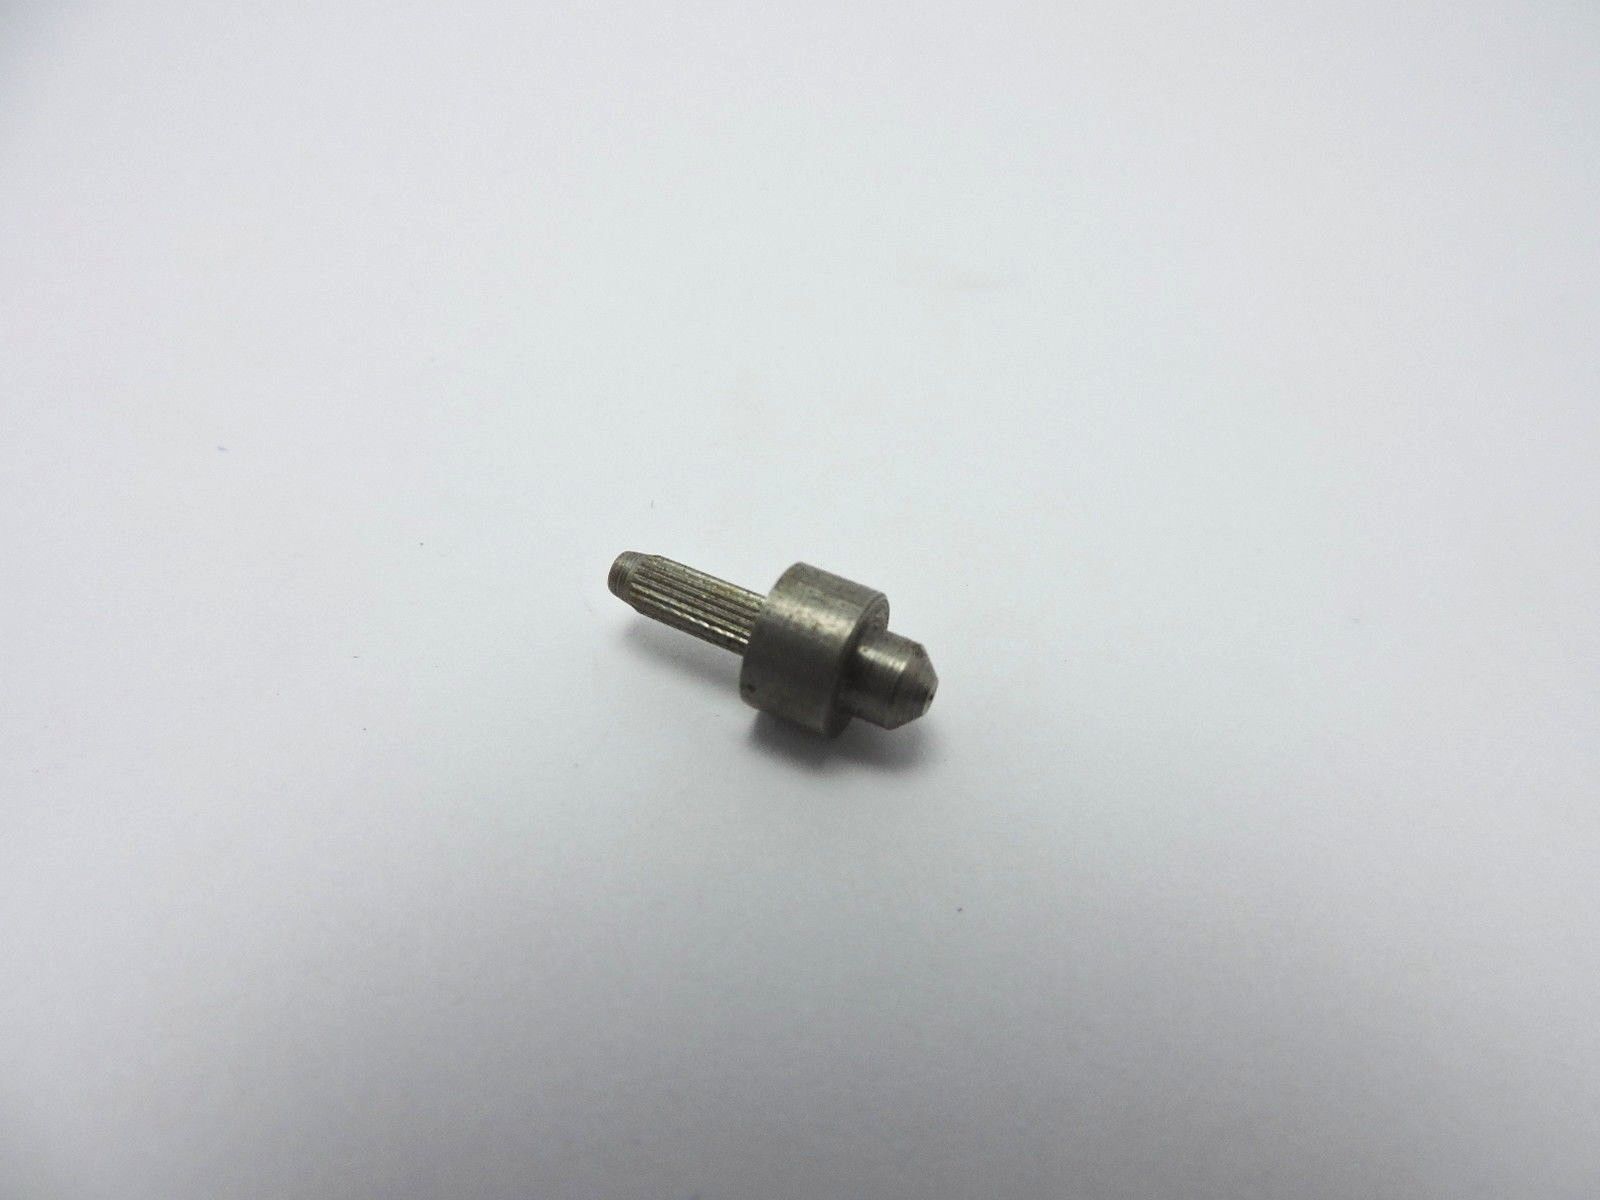 Lower Pin - Berkel OEM Part # 3375-00311 - Available from City Food Equipment